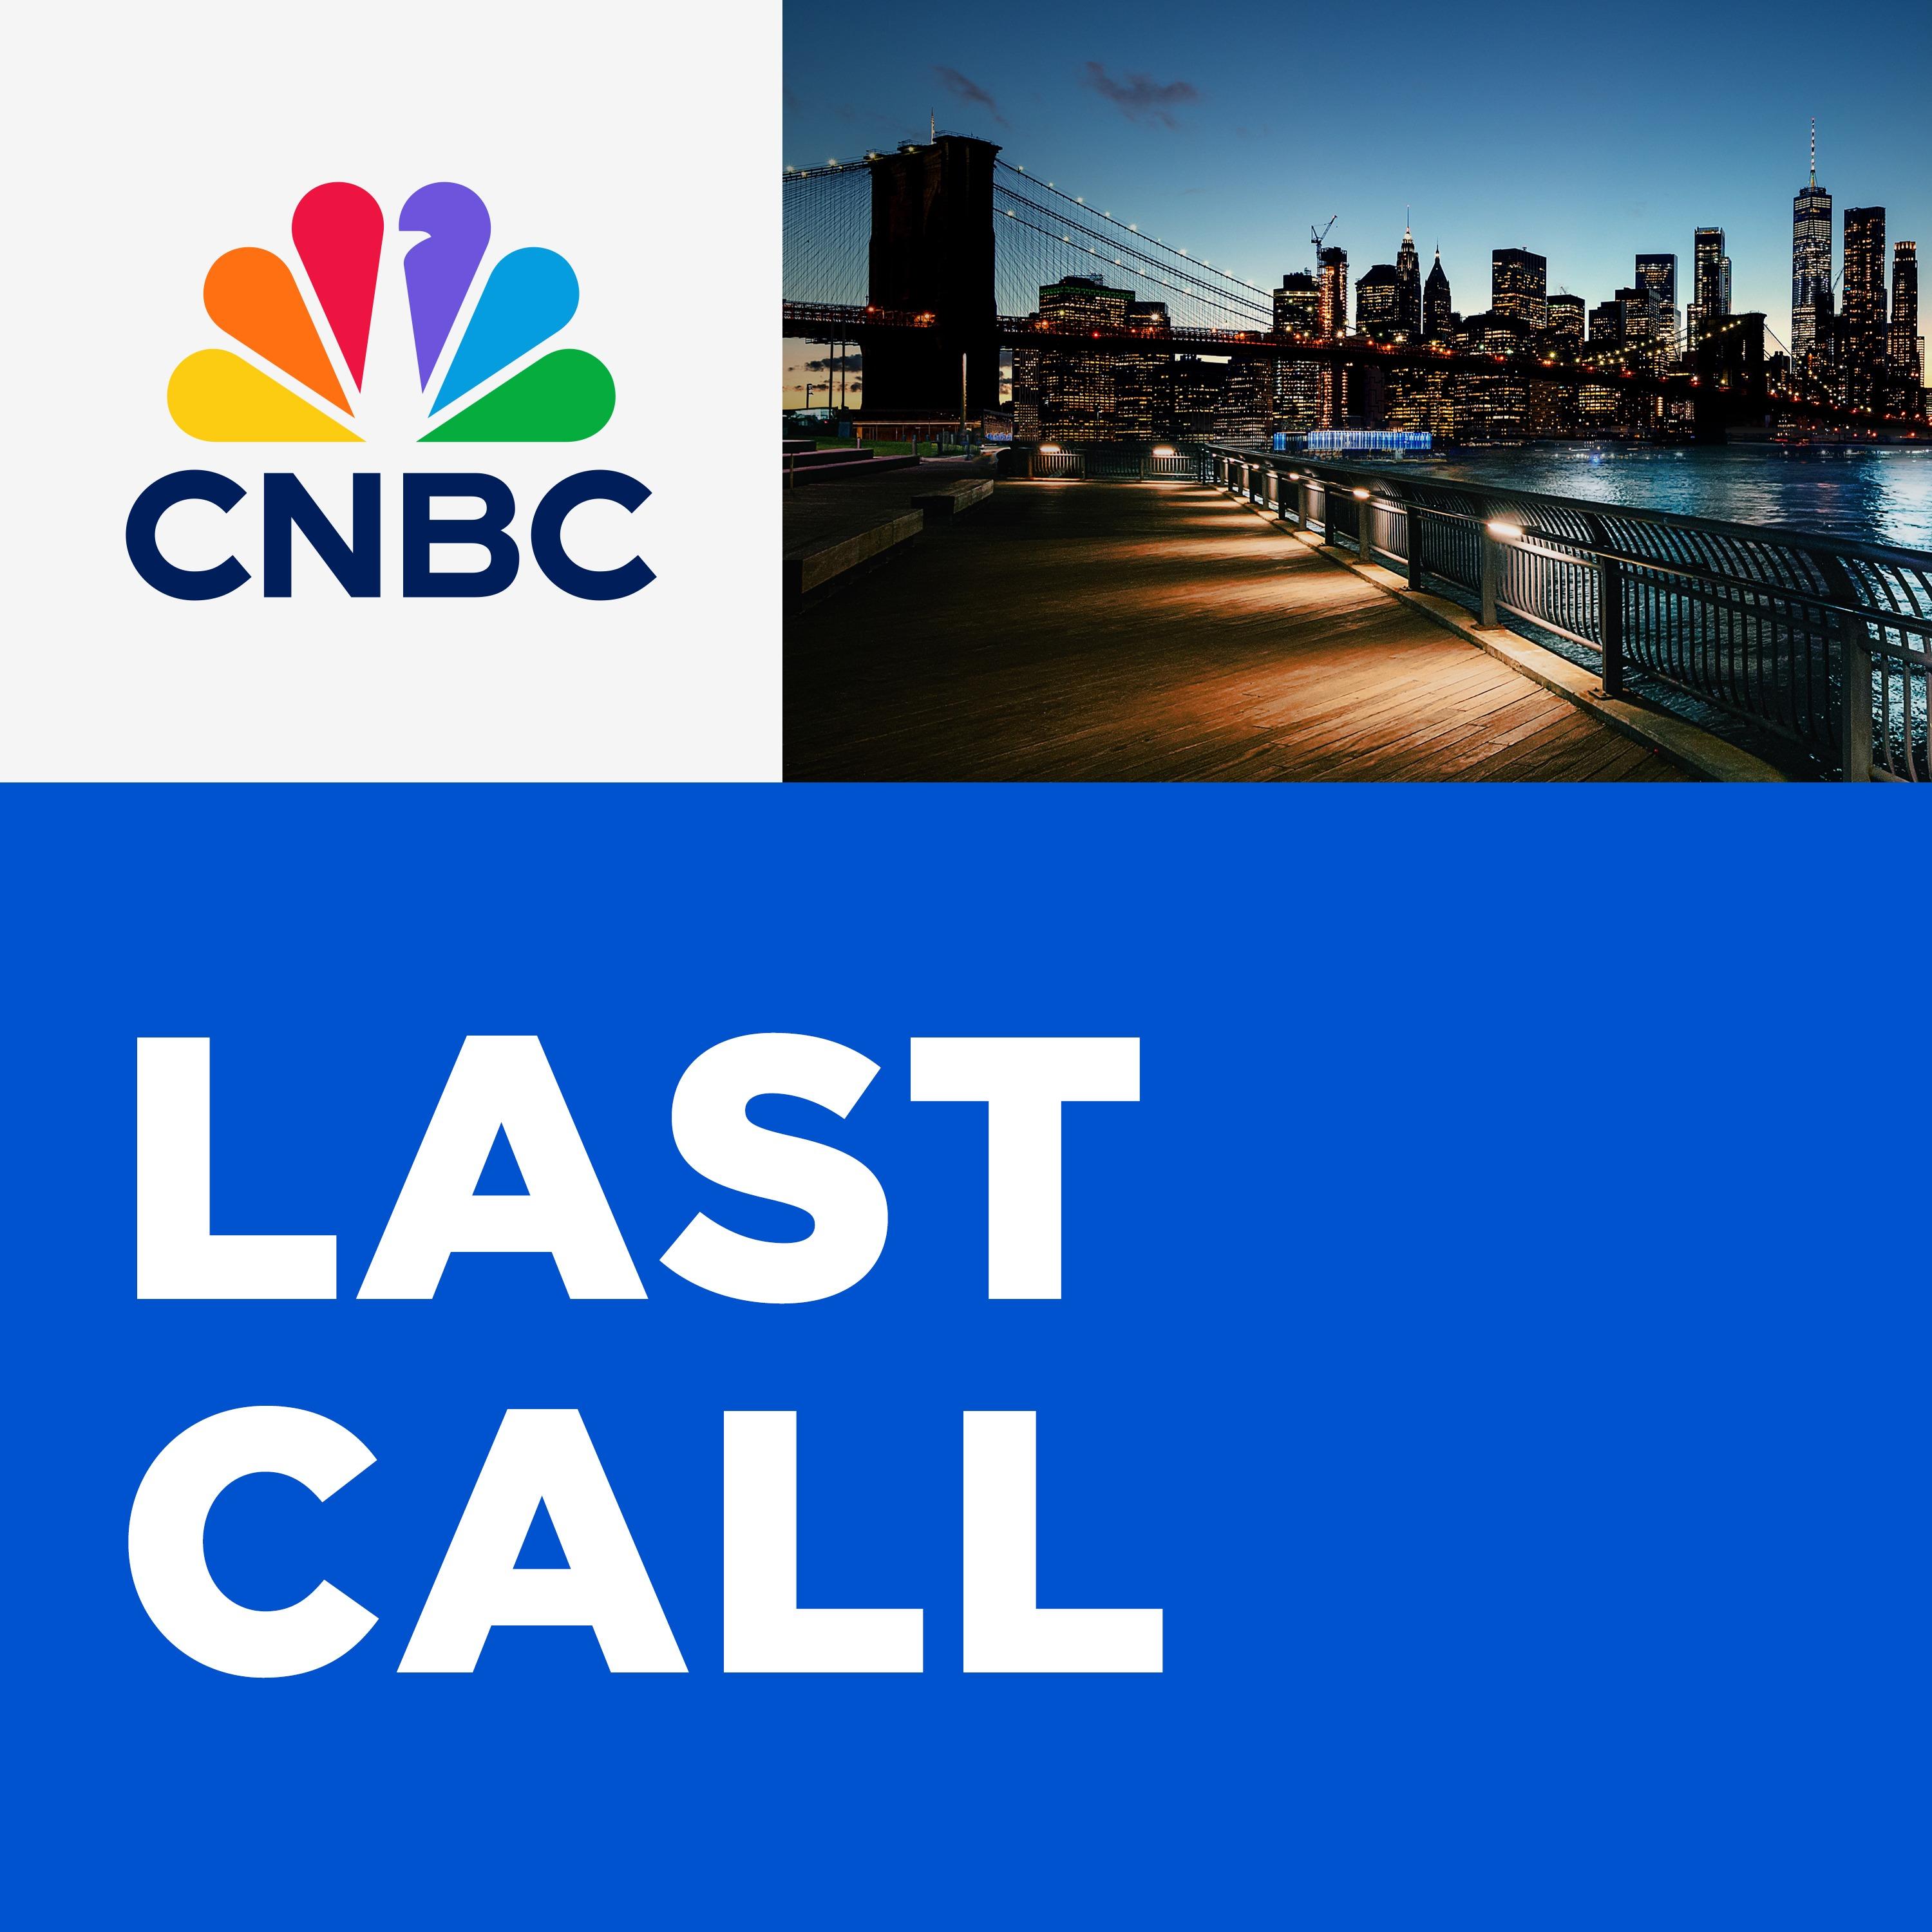 Show poster of CNBC's "Last Call"